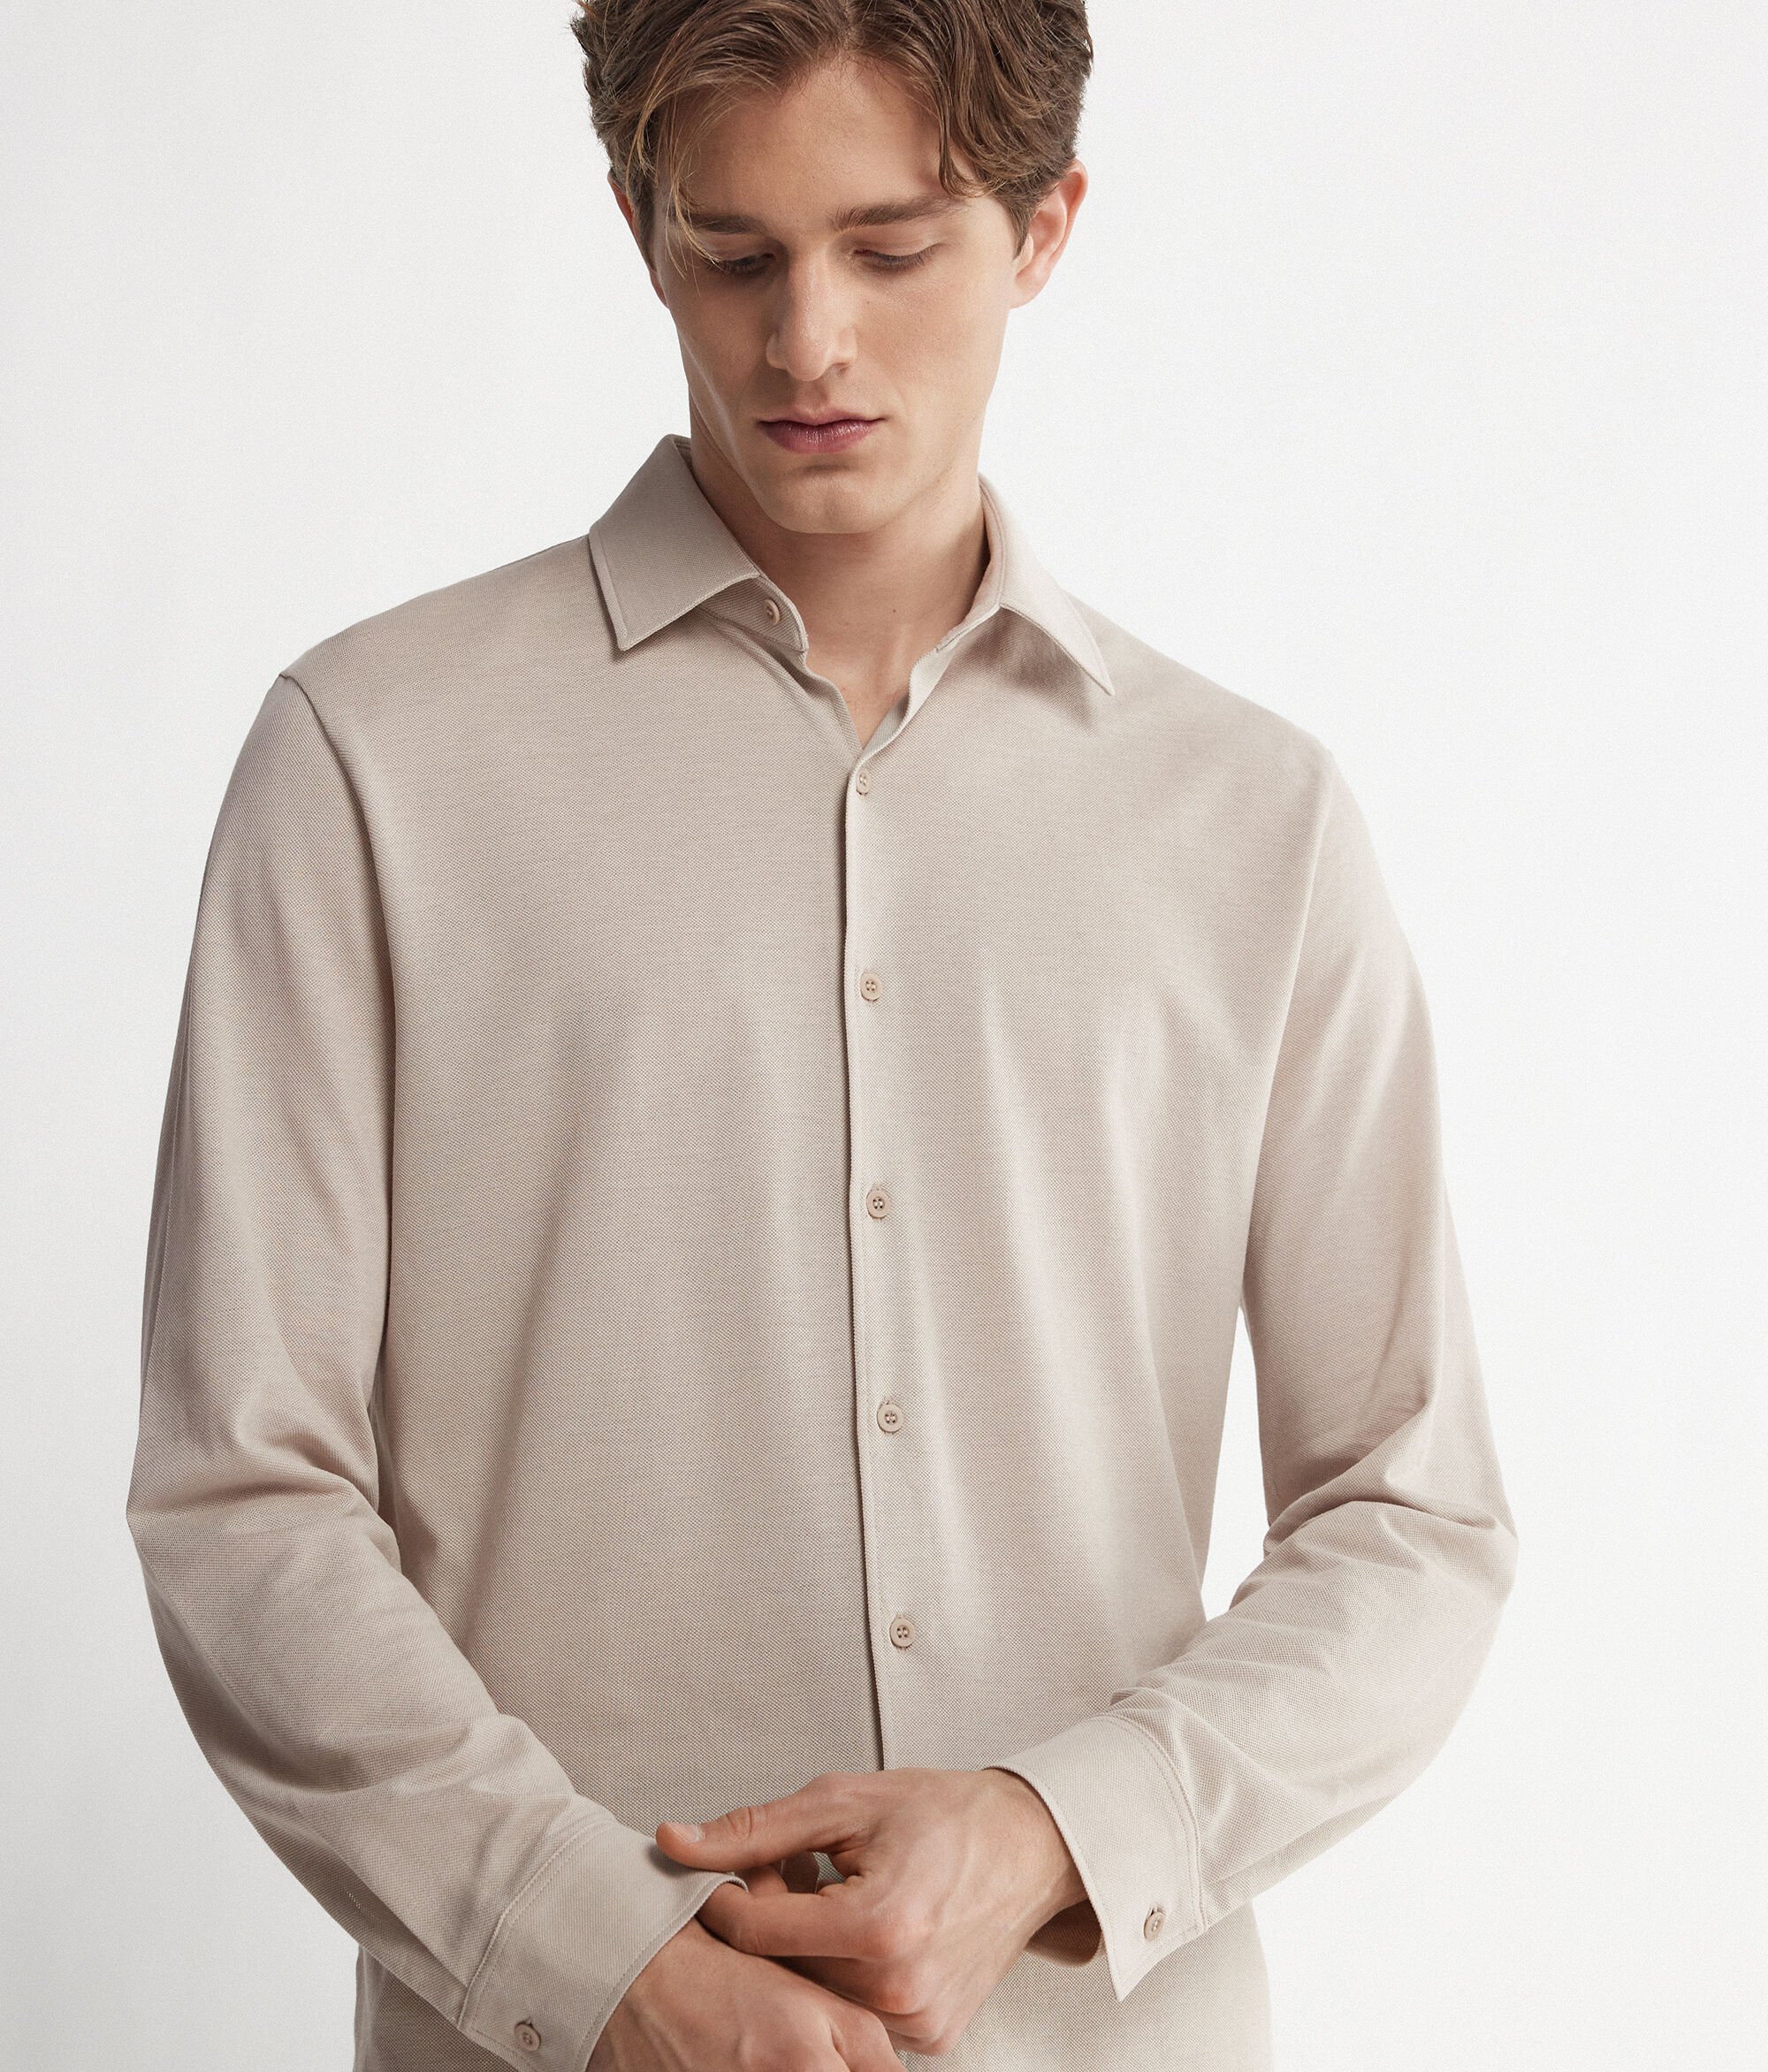 Long-Sleeved Shirt in Cotton and Silk Piqué